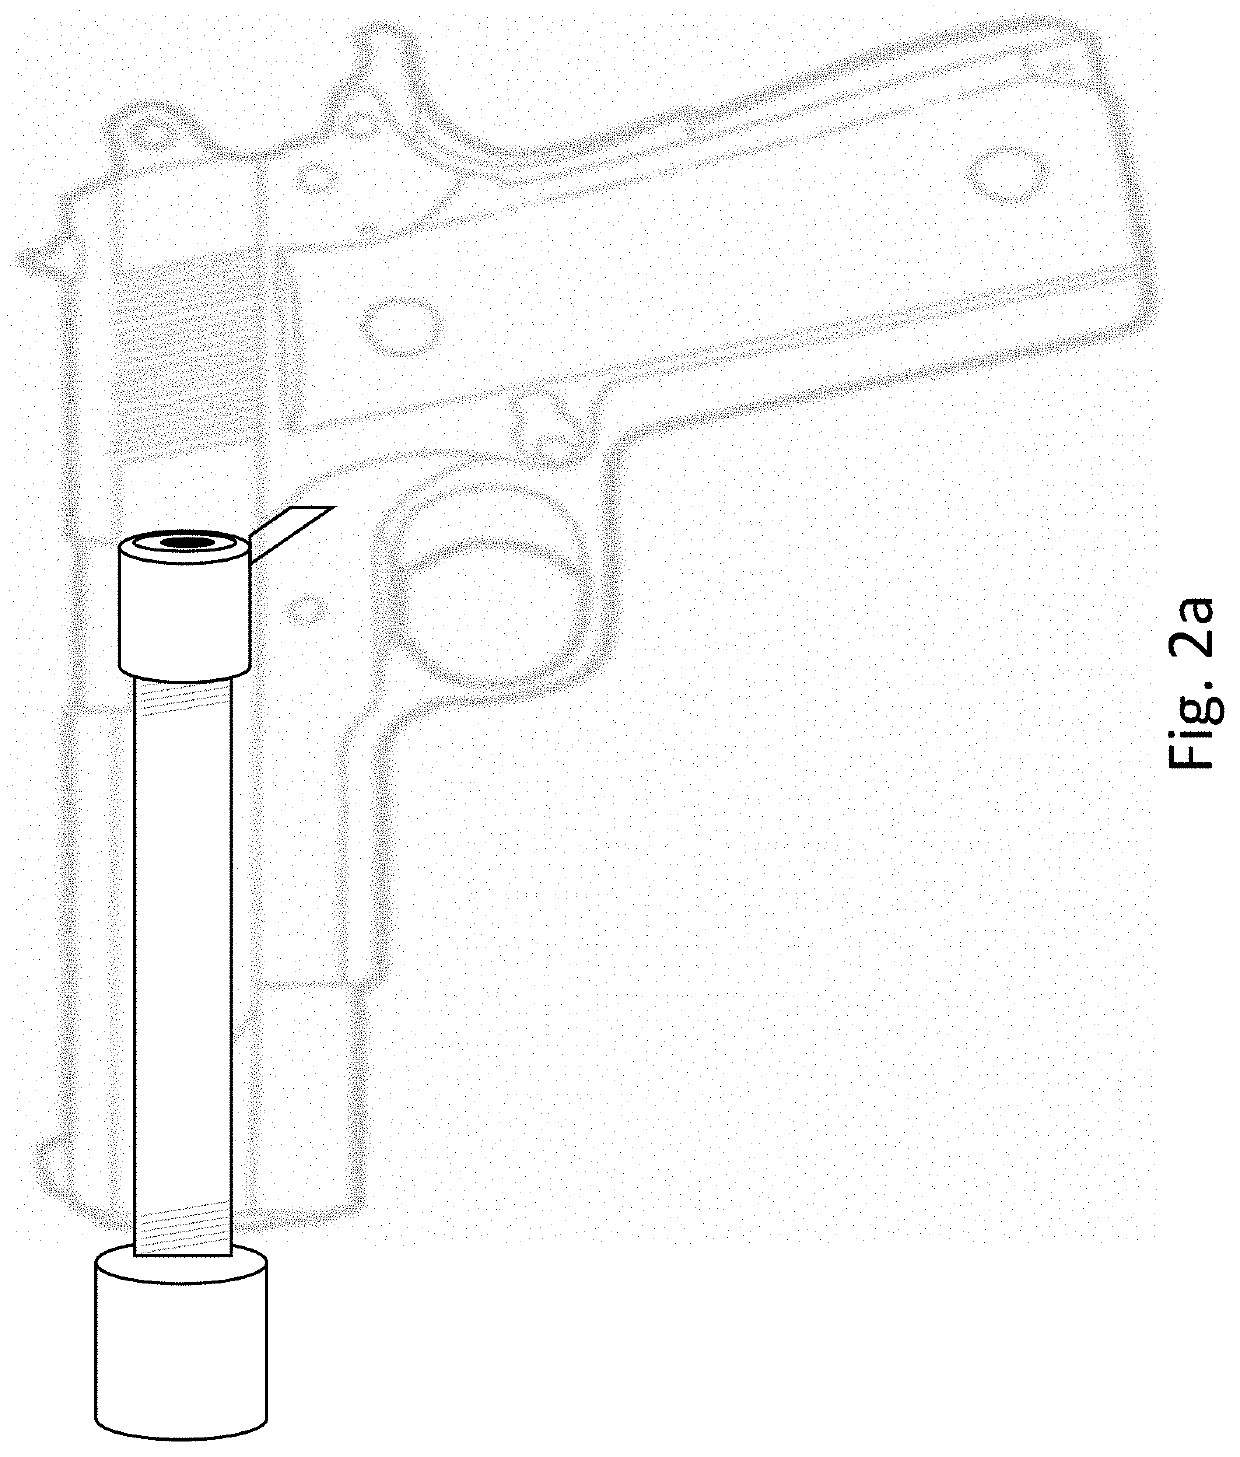 Methods and systems for improved simulation of firearms usage